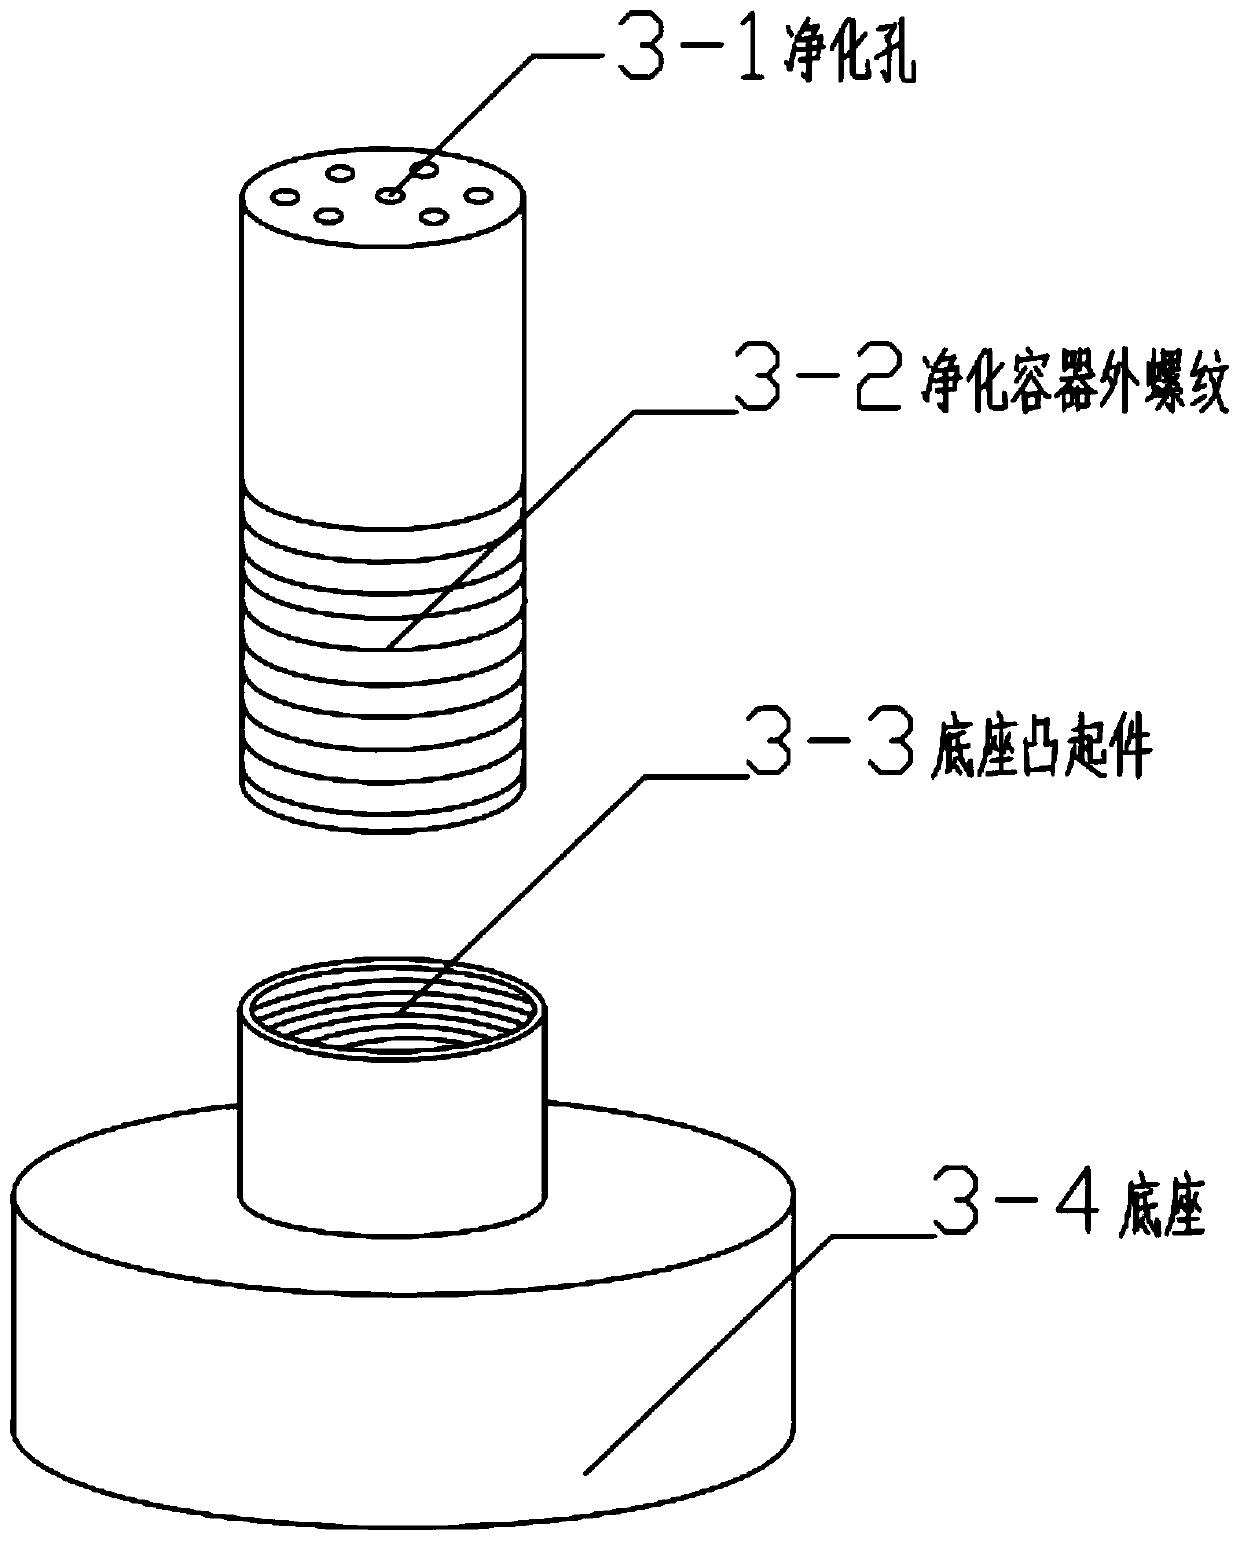 A drinking water cup with anti-scald performance